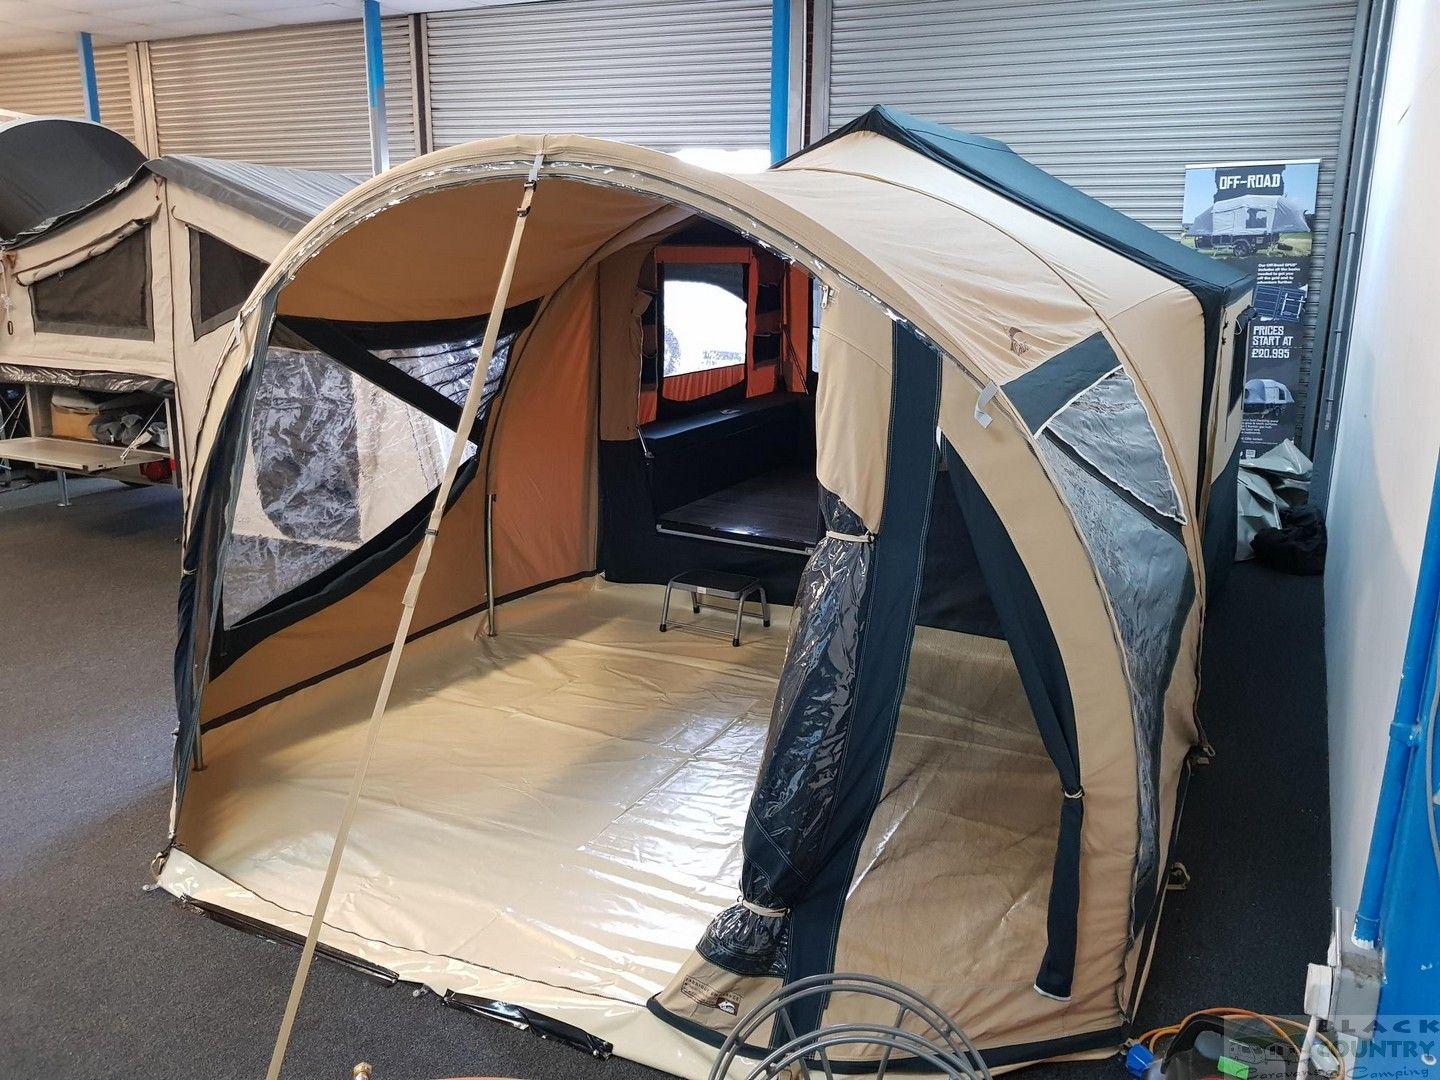 Orion awning